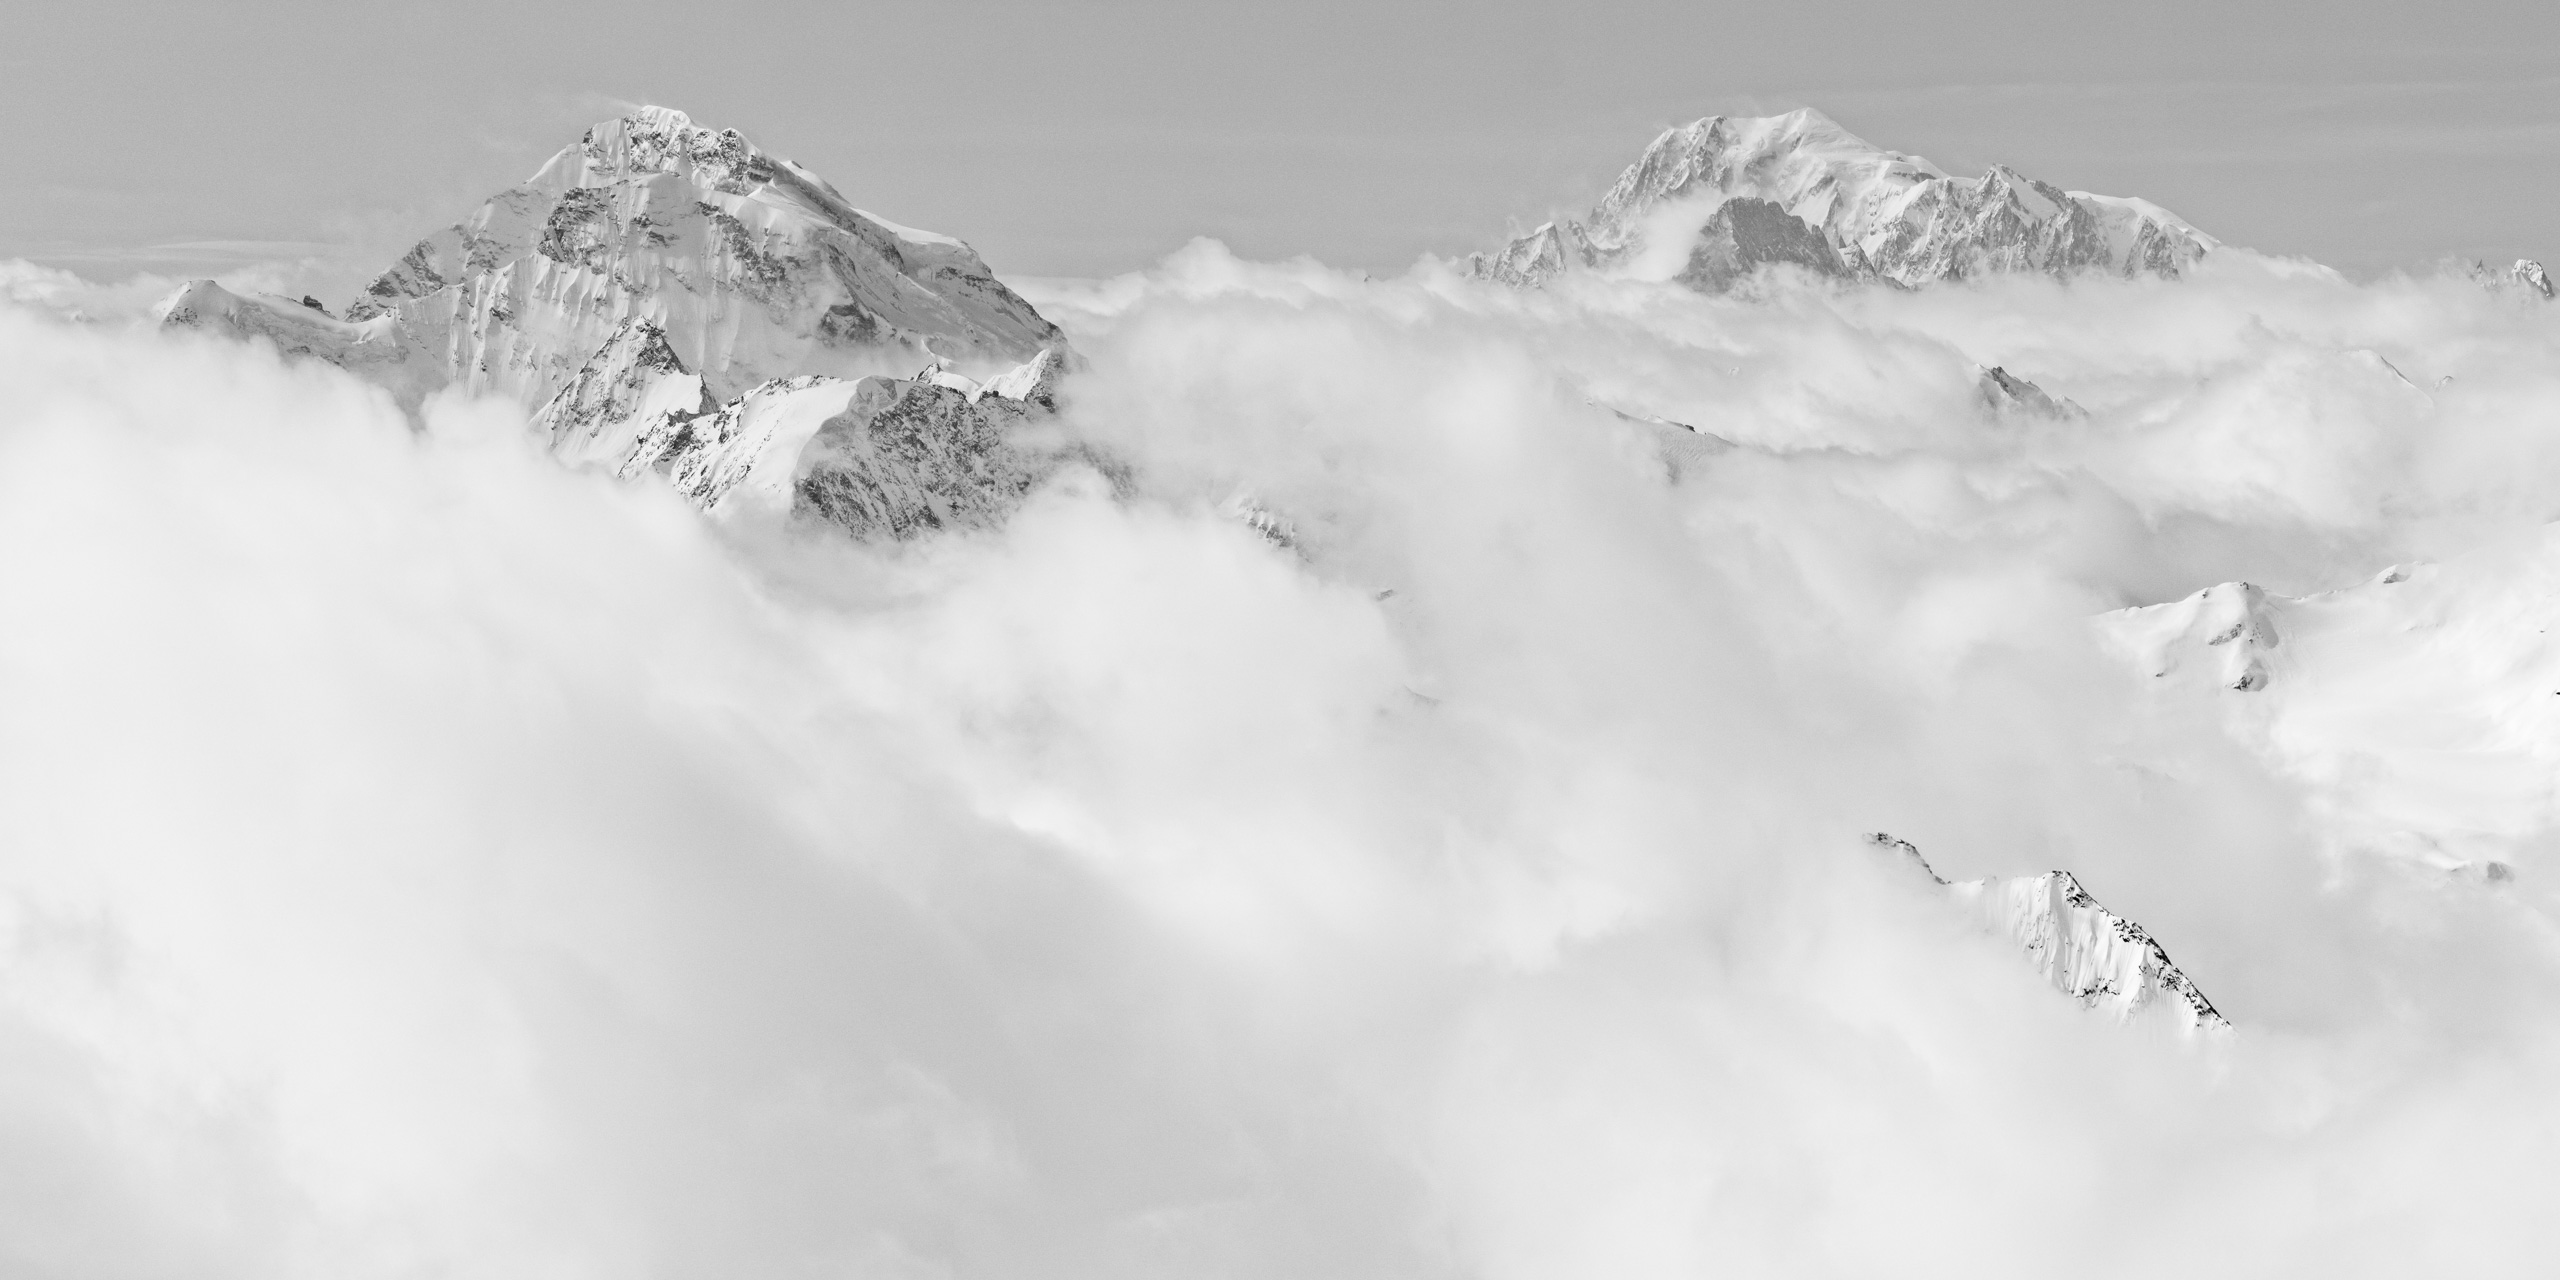 Panorama mont blanc massif - Combin - panoramic flight a bove mont blanc chamonix in the clouds